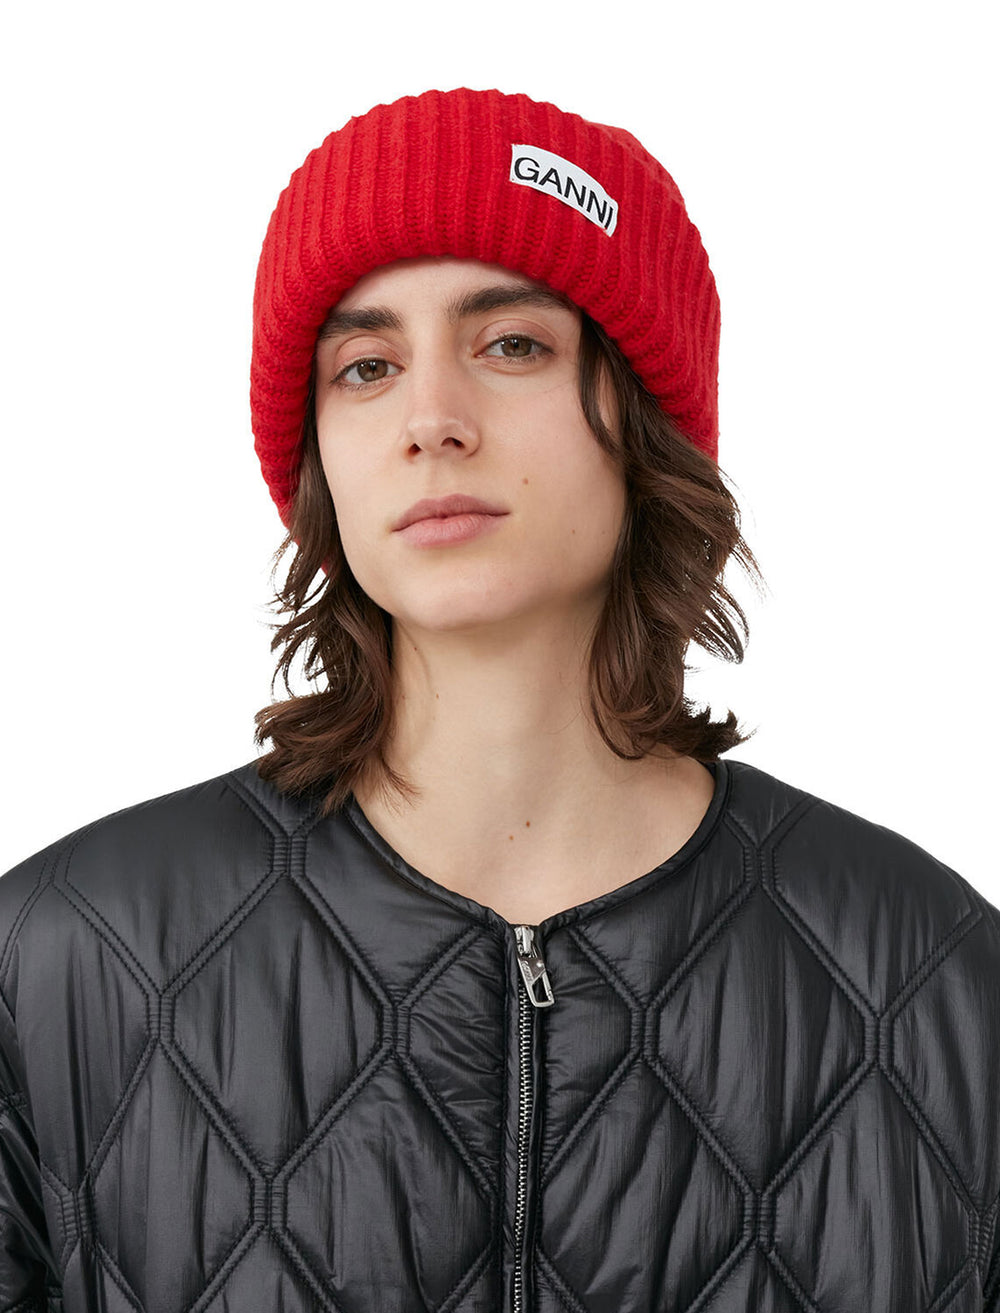 Model wearing GANNI's structured rib beanie in racing red.